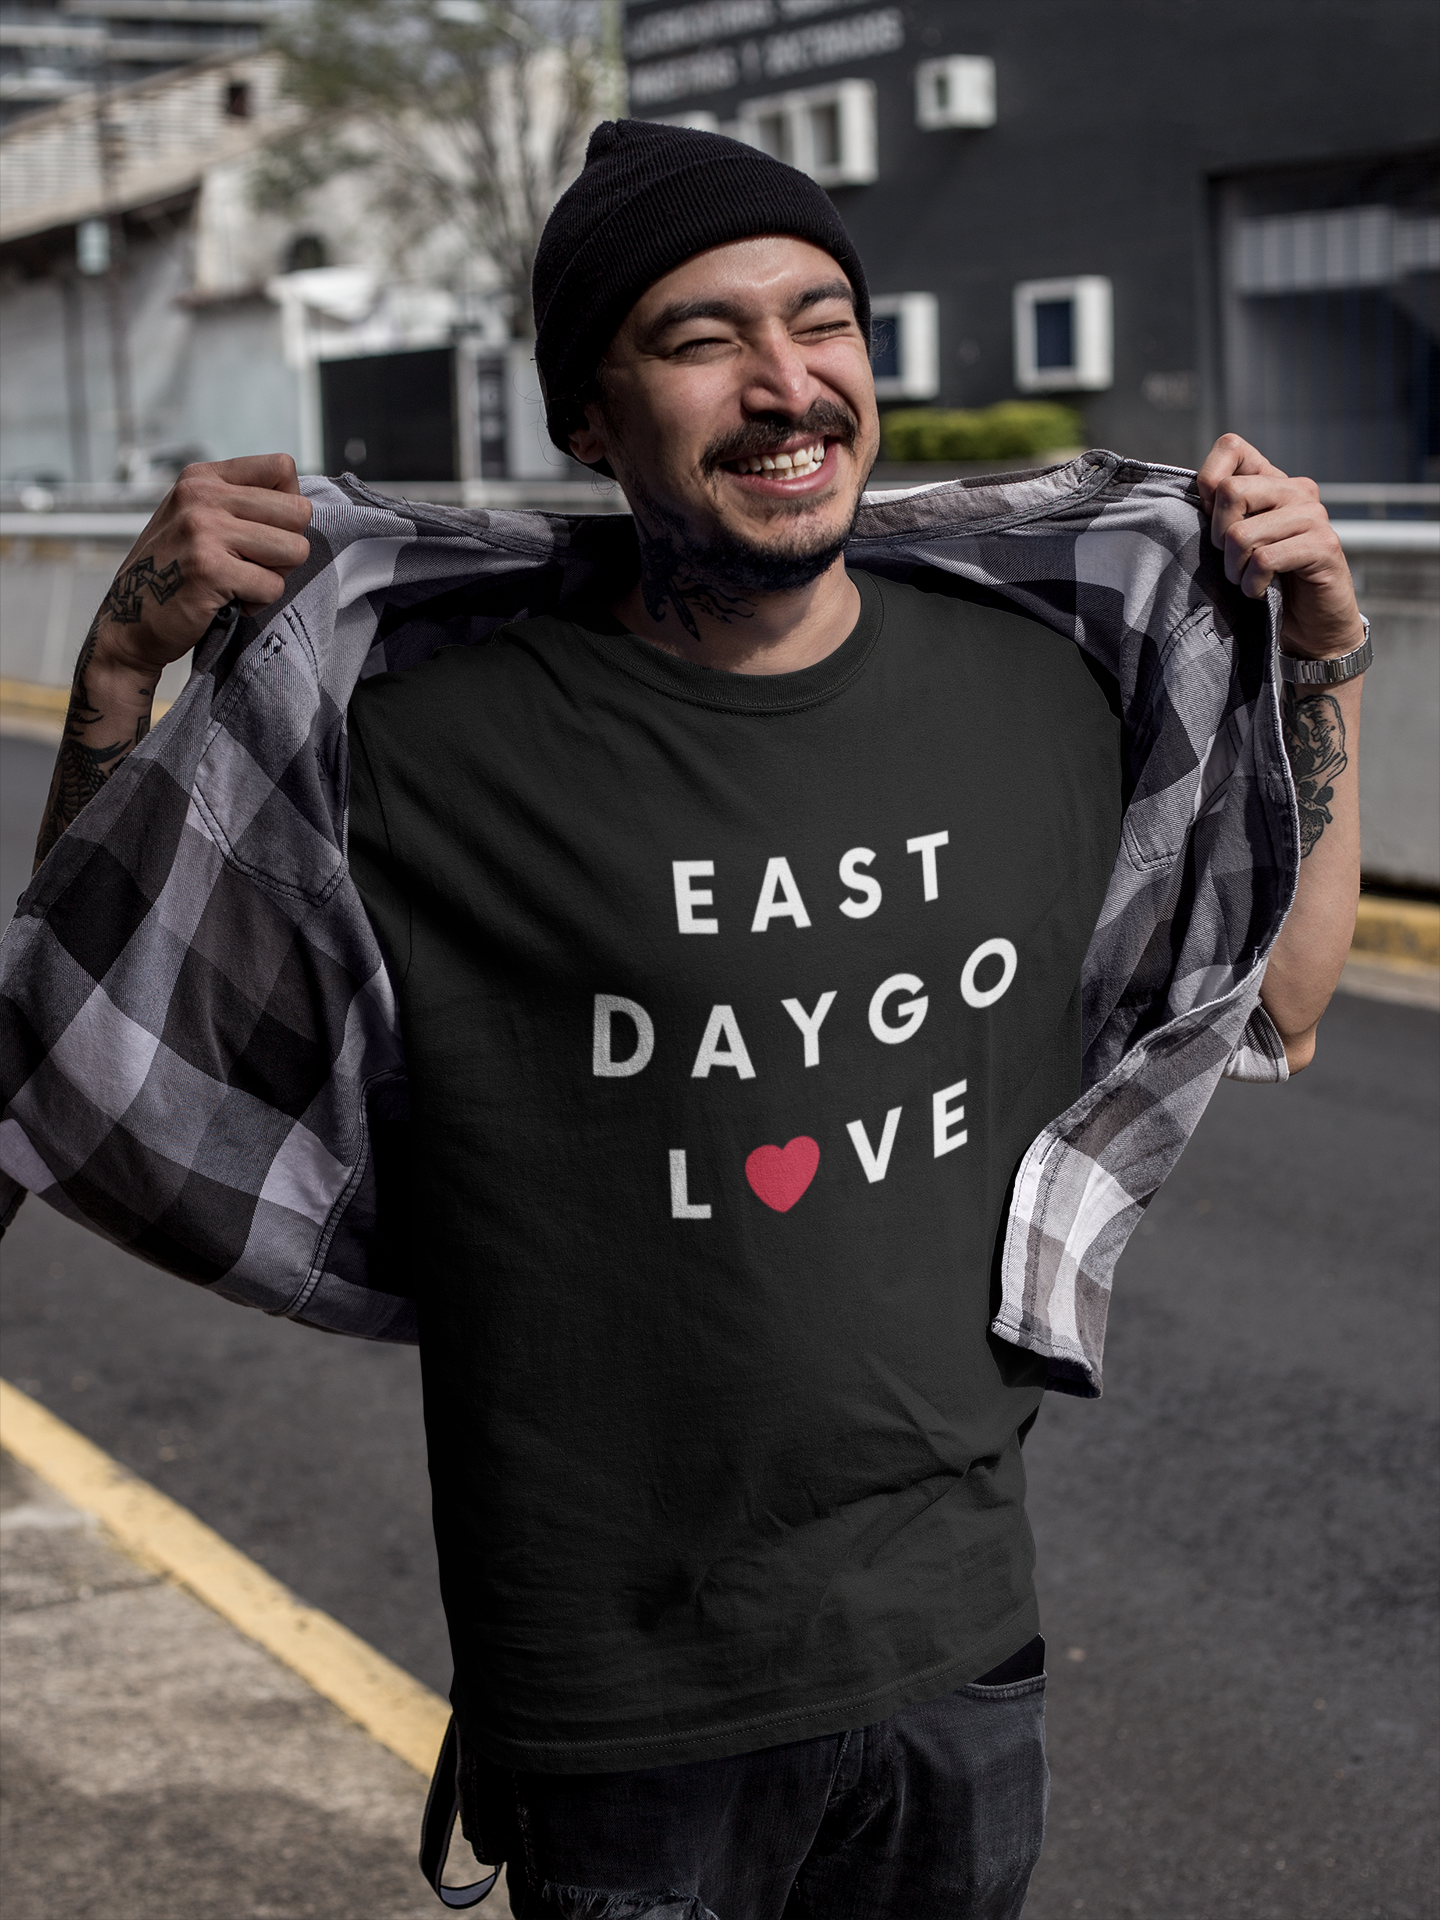 Smiling Asian man with tattoos standing outside buildings wearing a beanie and East Daygo t-shirt. 